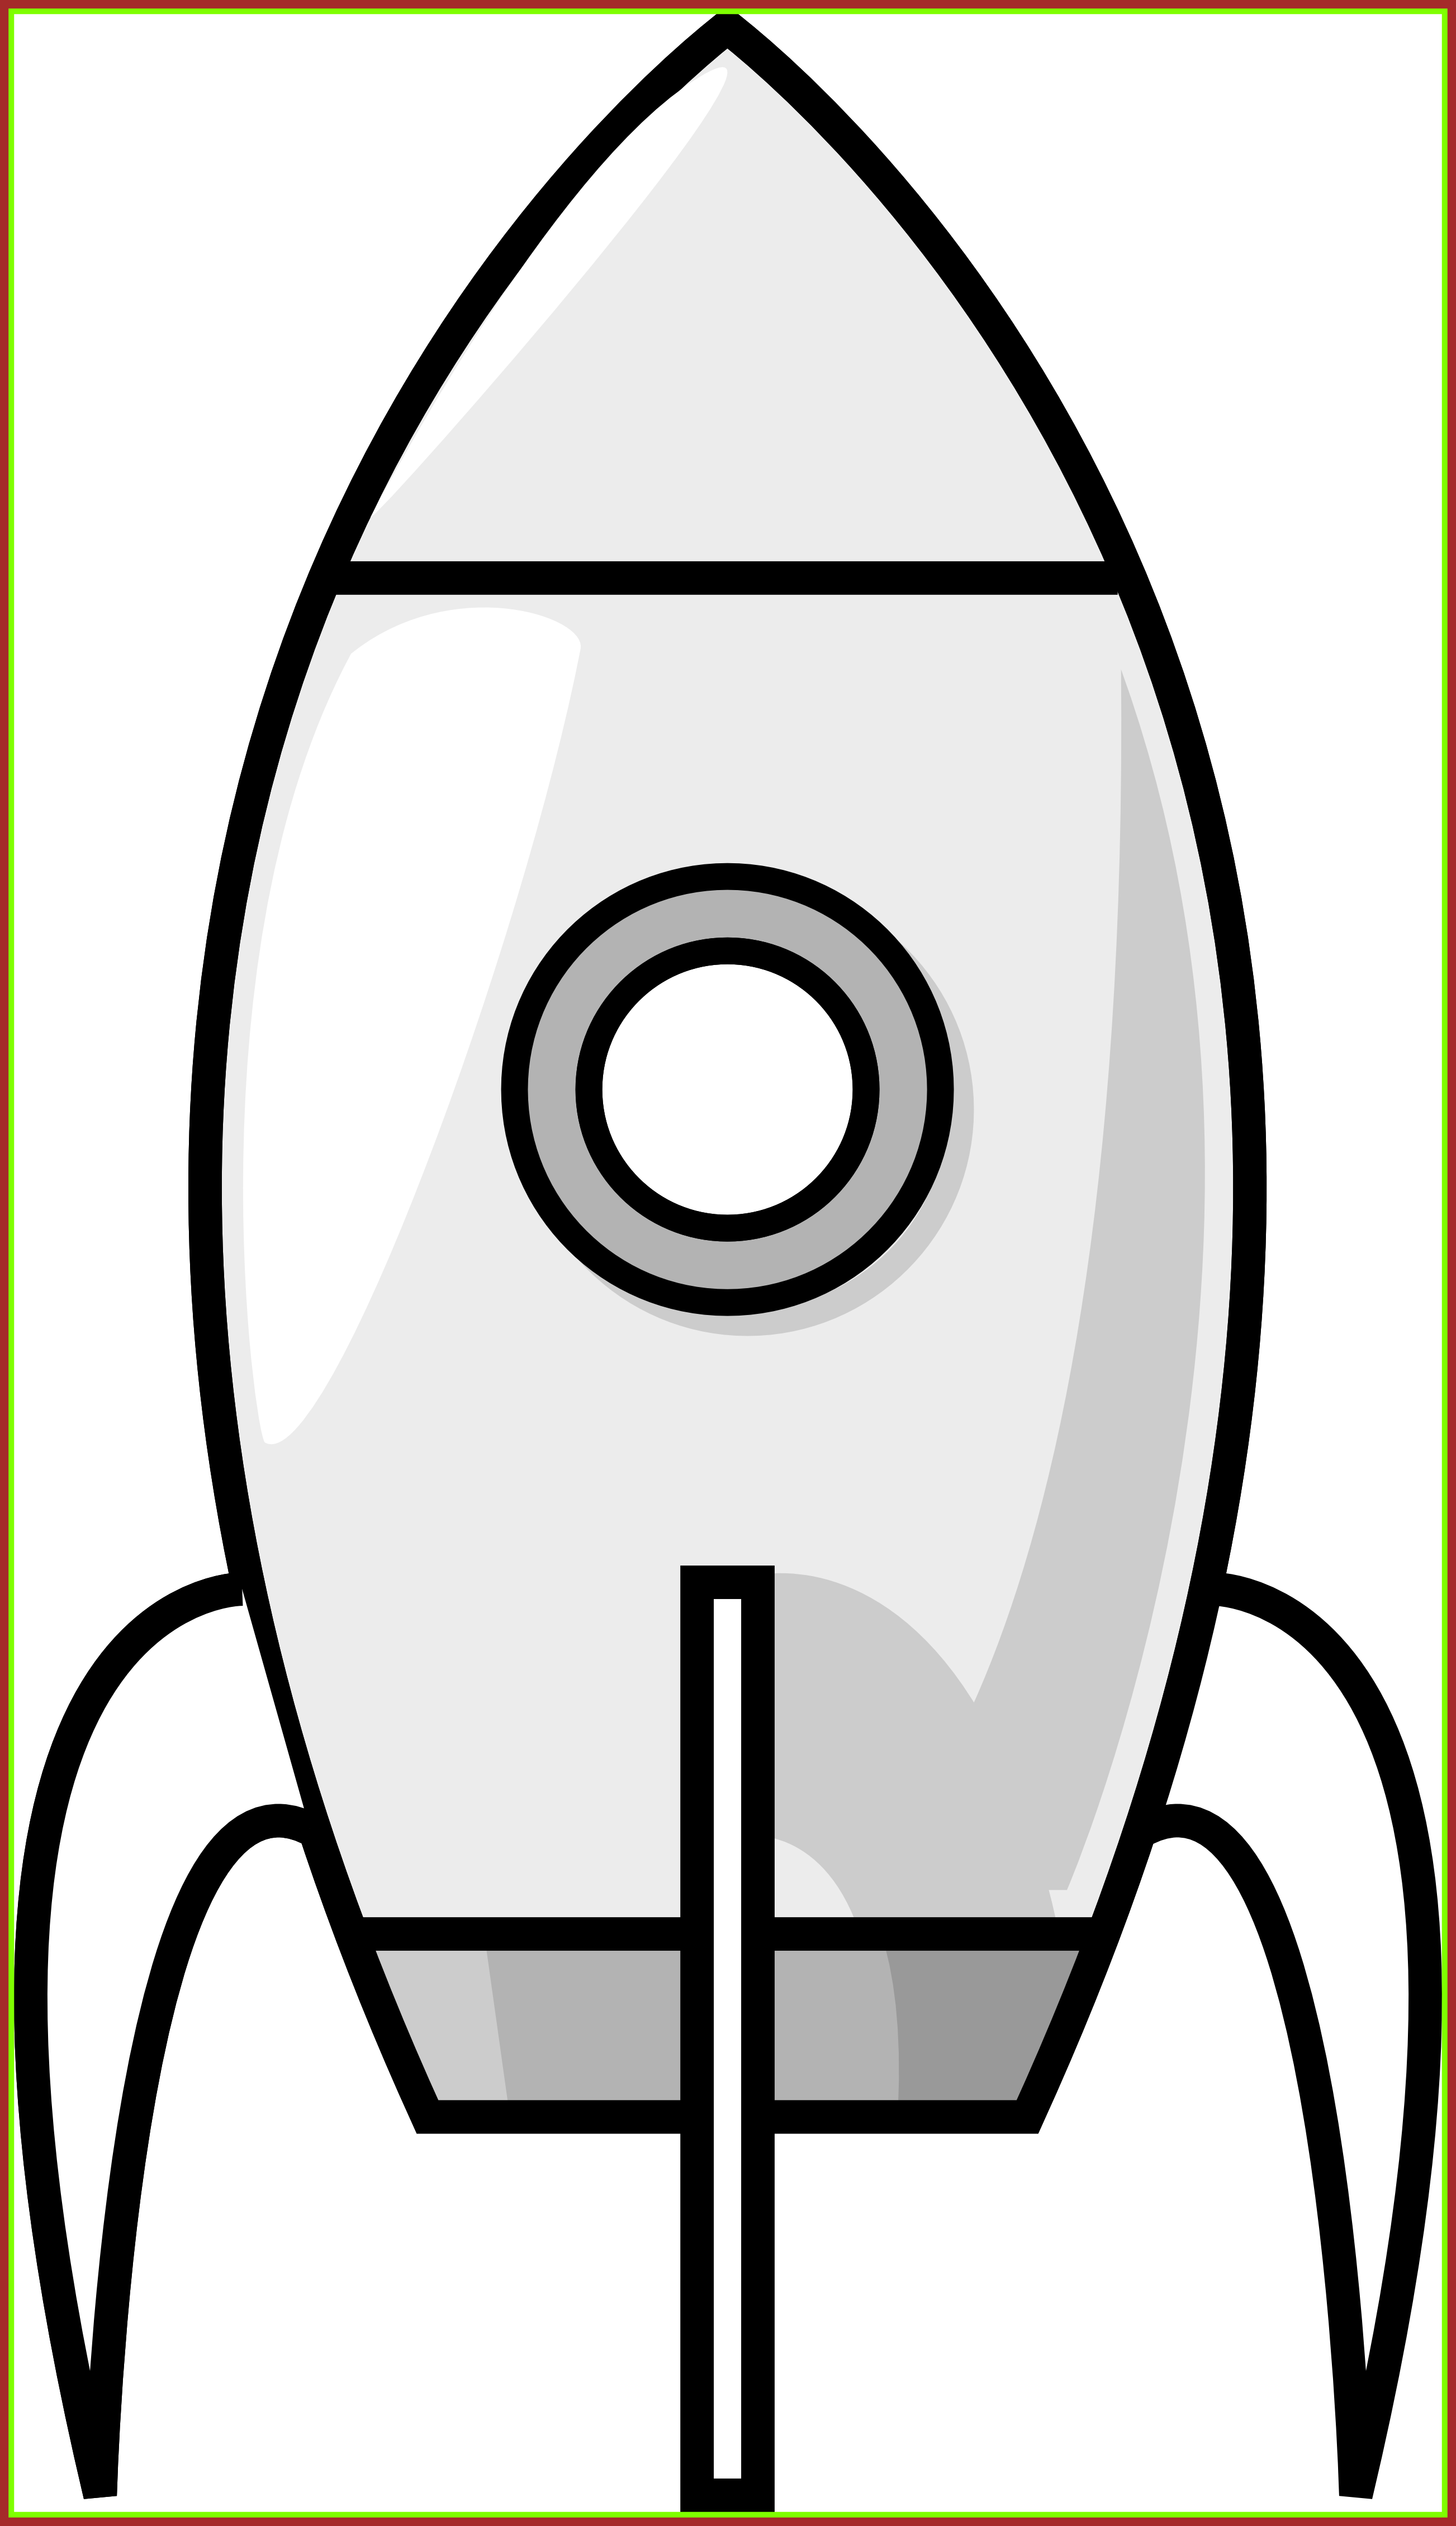 Appealing Rocket Clipart Black And White Panda For - Rocket Cartoon Black And White (2605x4518)